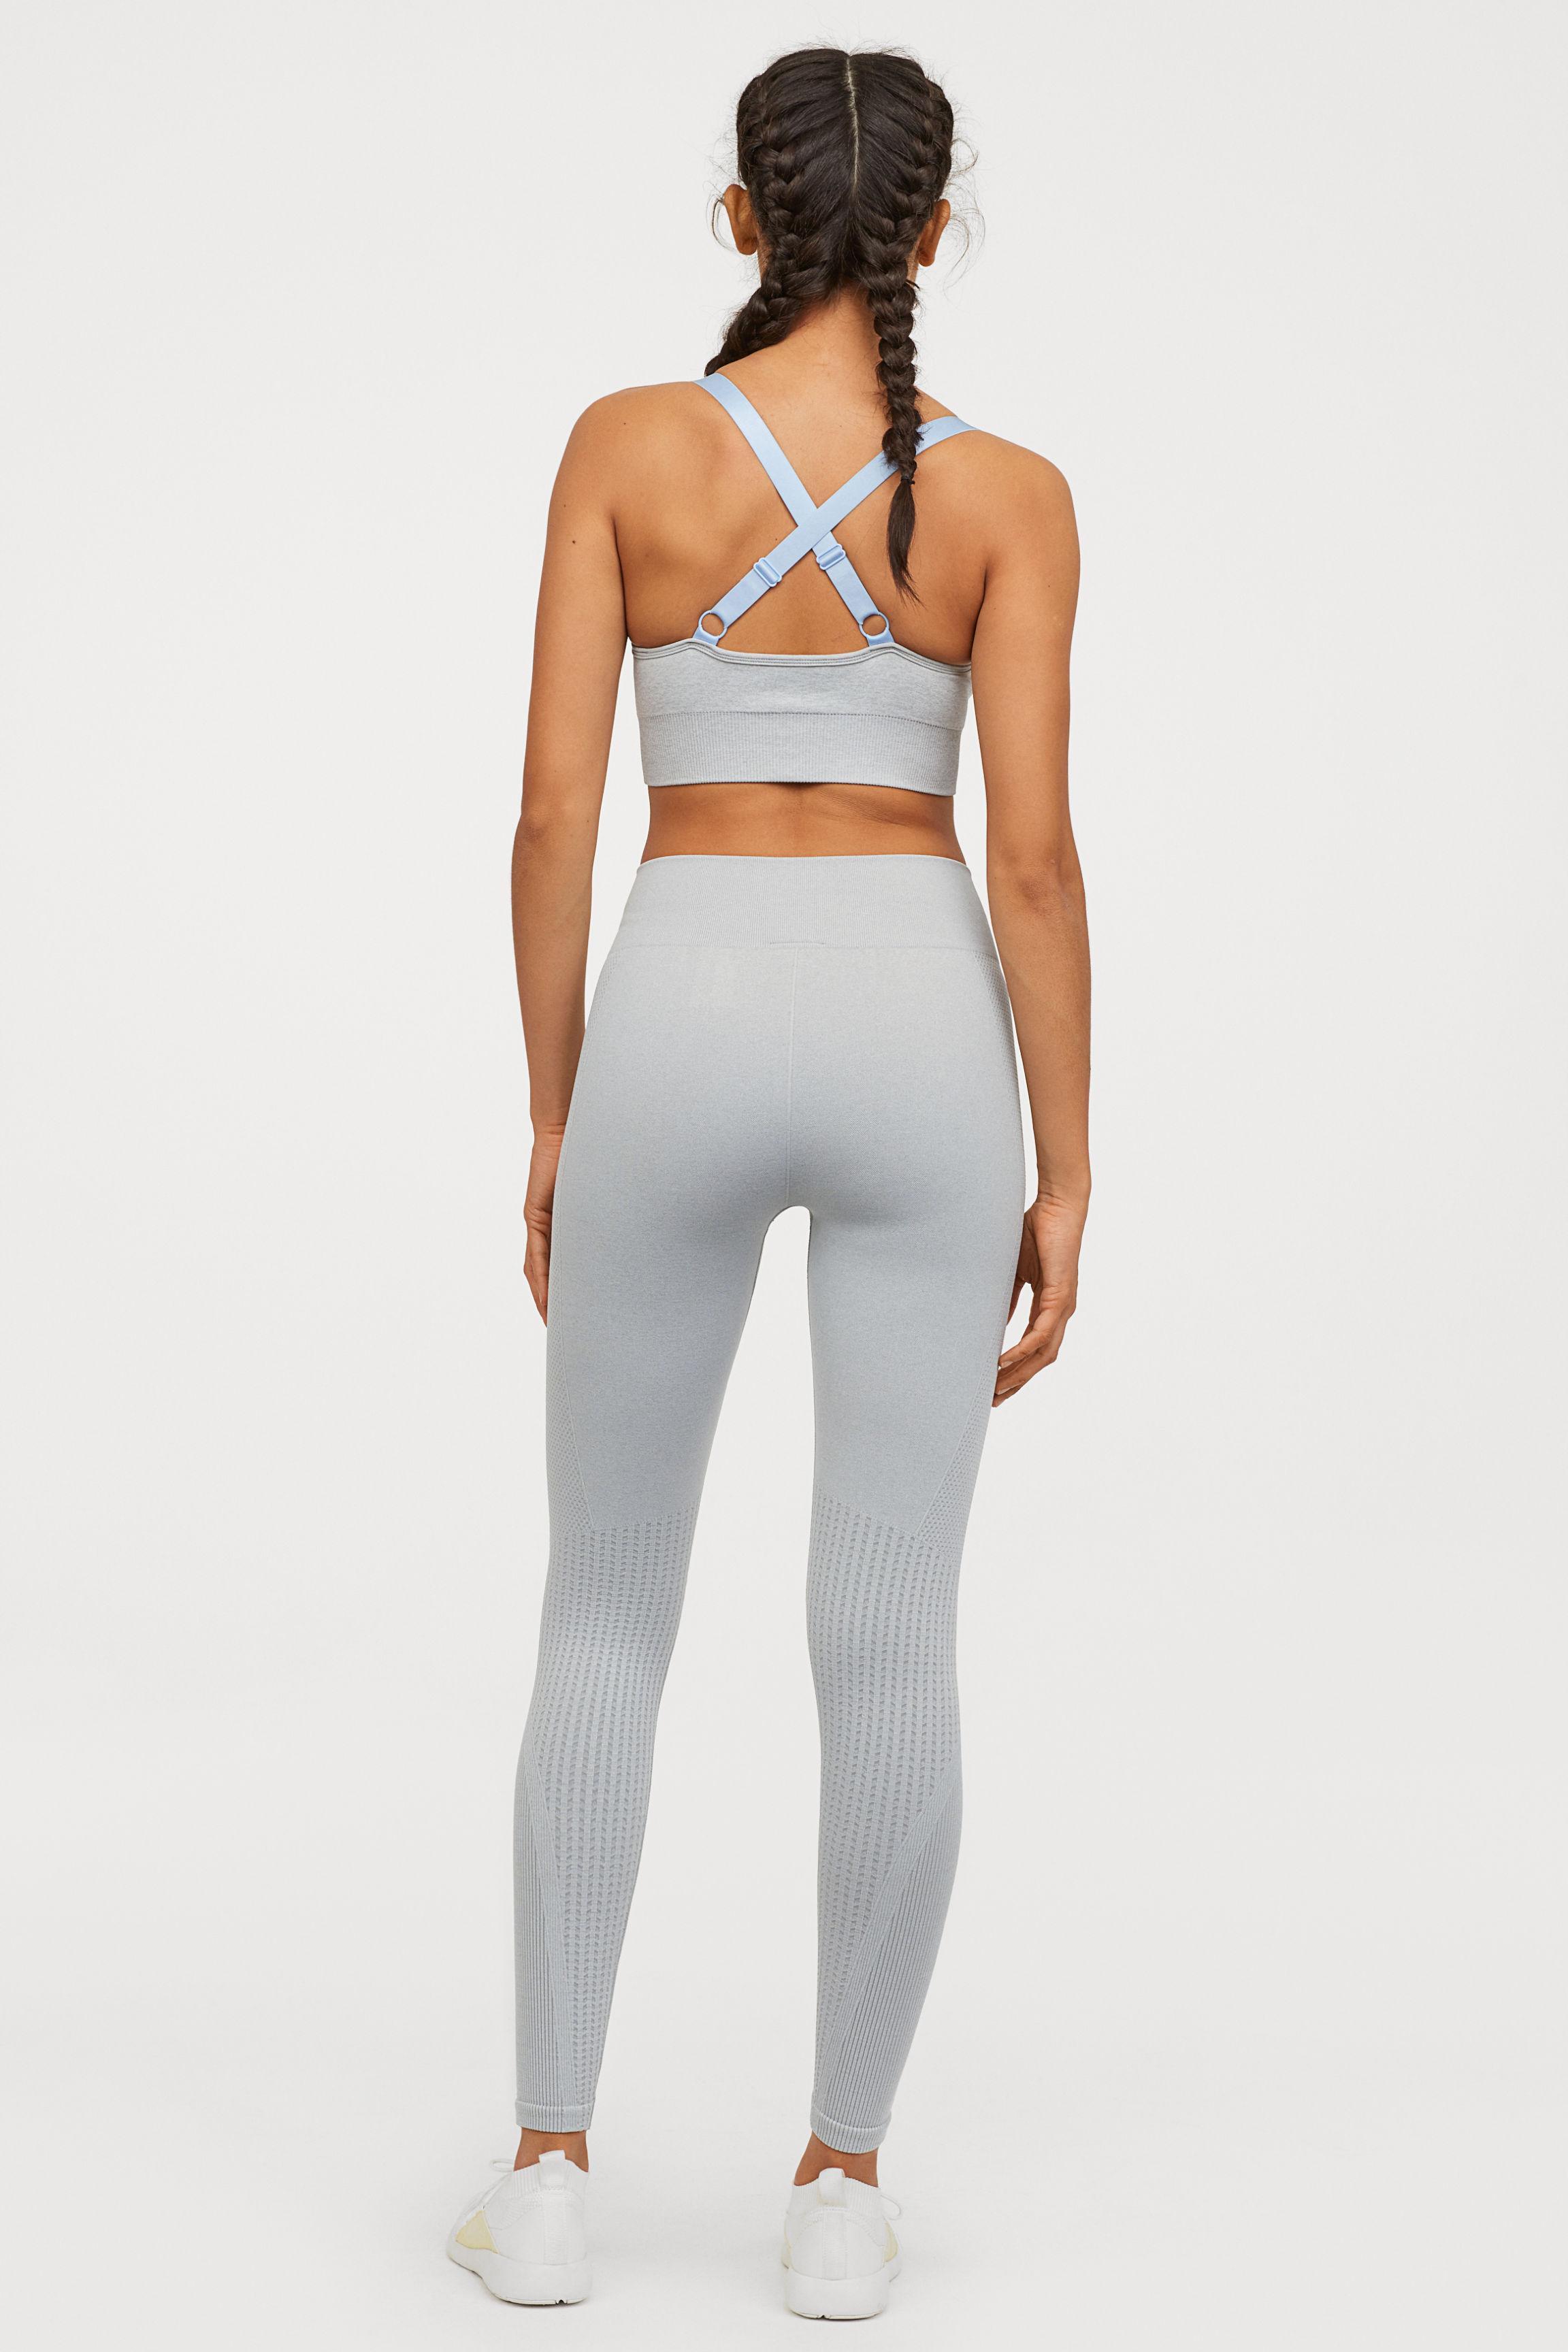 H&m Sportswear Leggings Wholesale  International Society of Precision  Agriculture